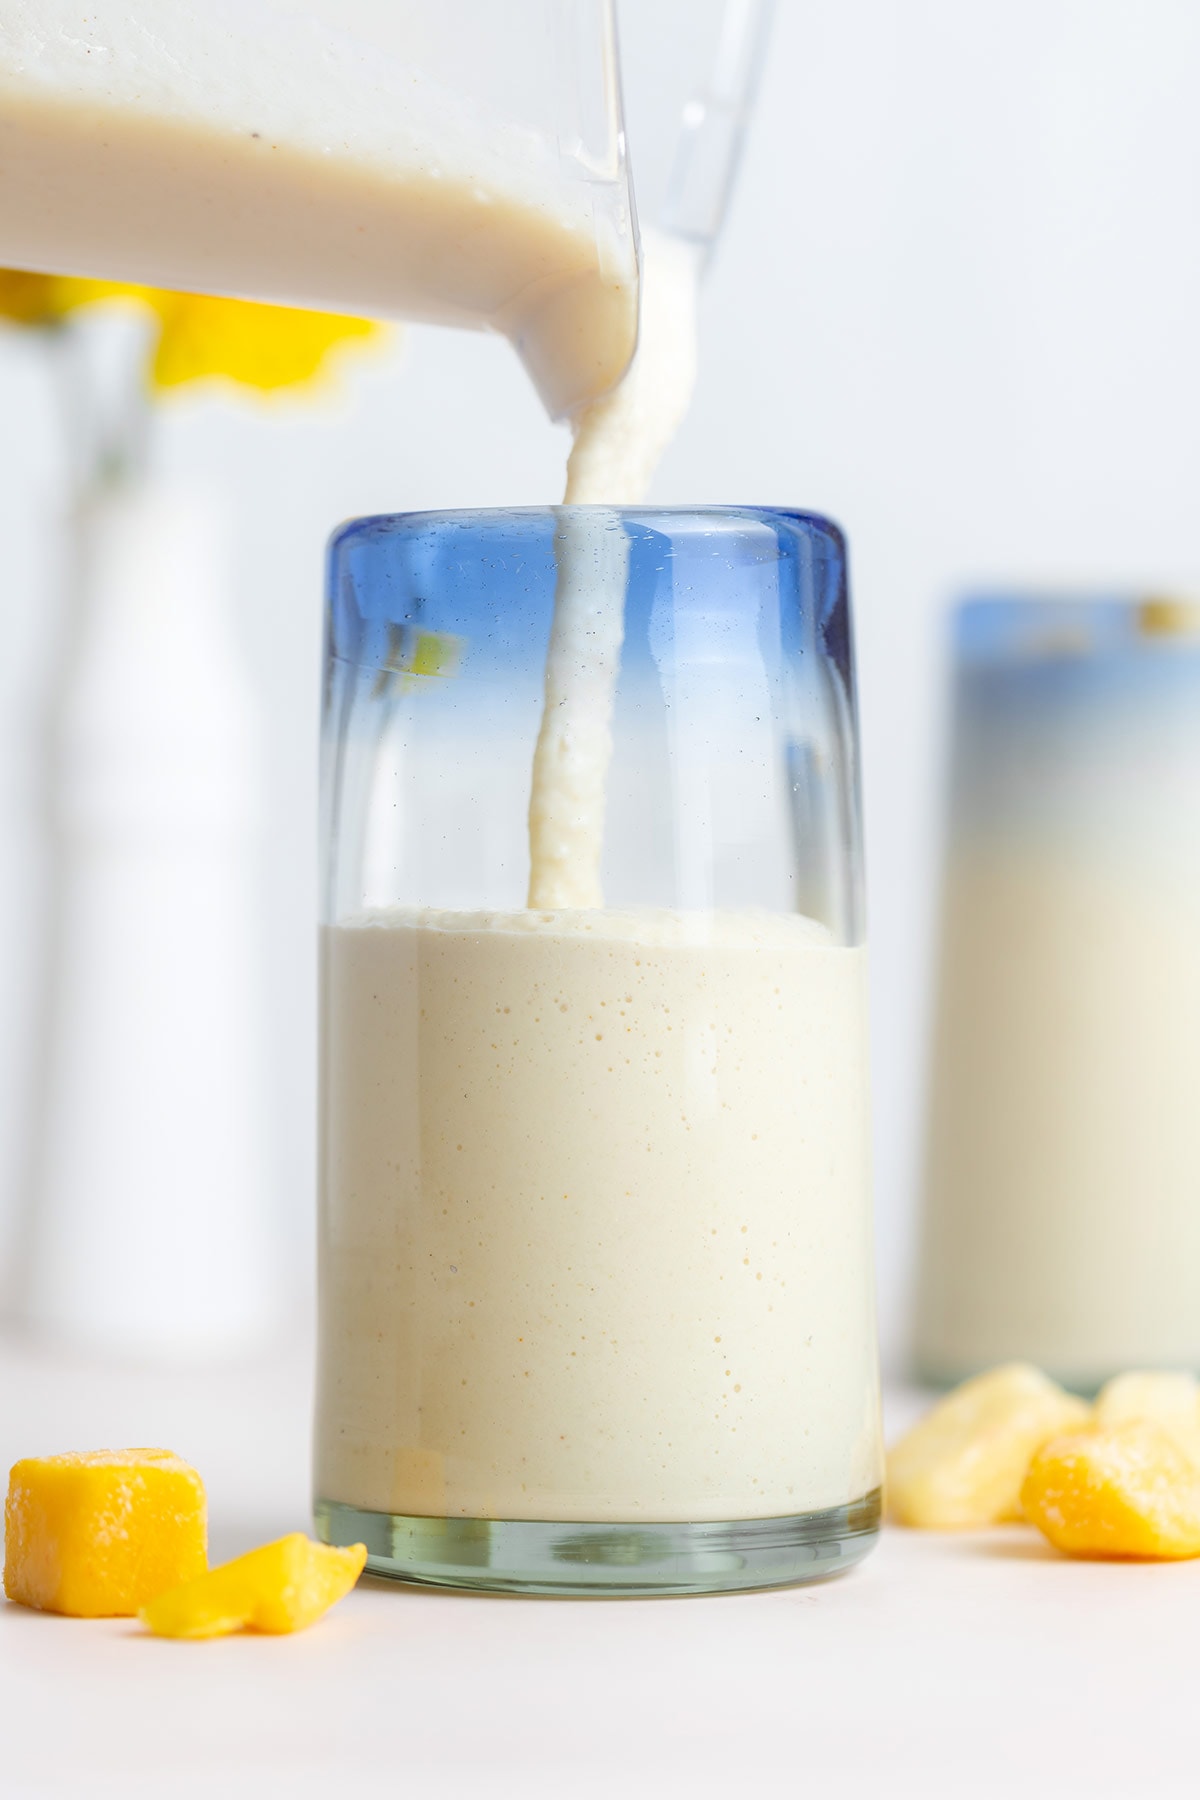 A light yellow smoothie being poured into a tall glass with a blue rim.